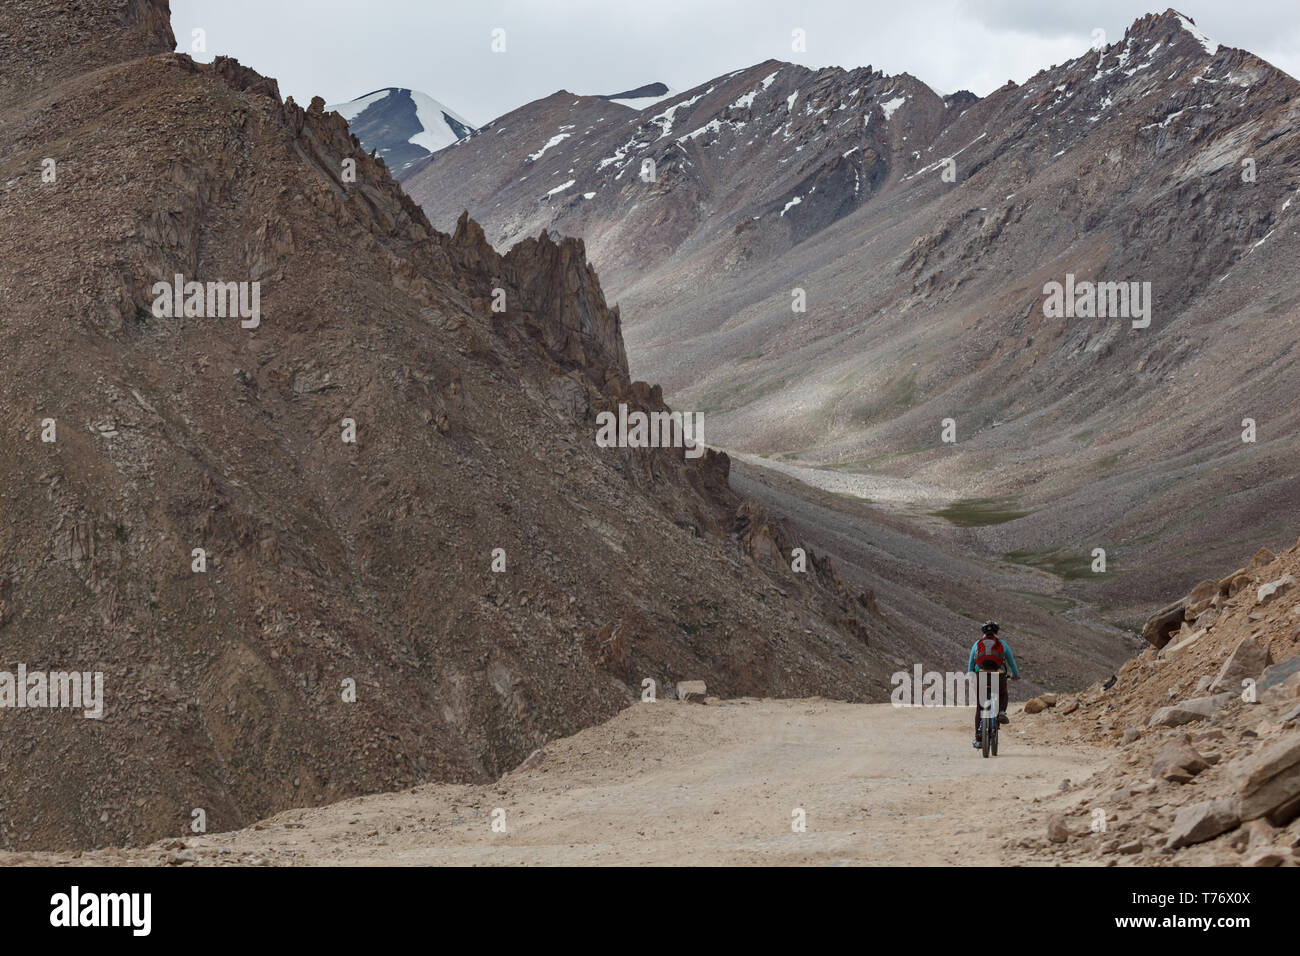 Single bike rider high in snow capped mountains rounding curve and heading down on pass through mountains to Kashmir, India on a sunny day Stock Photo